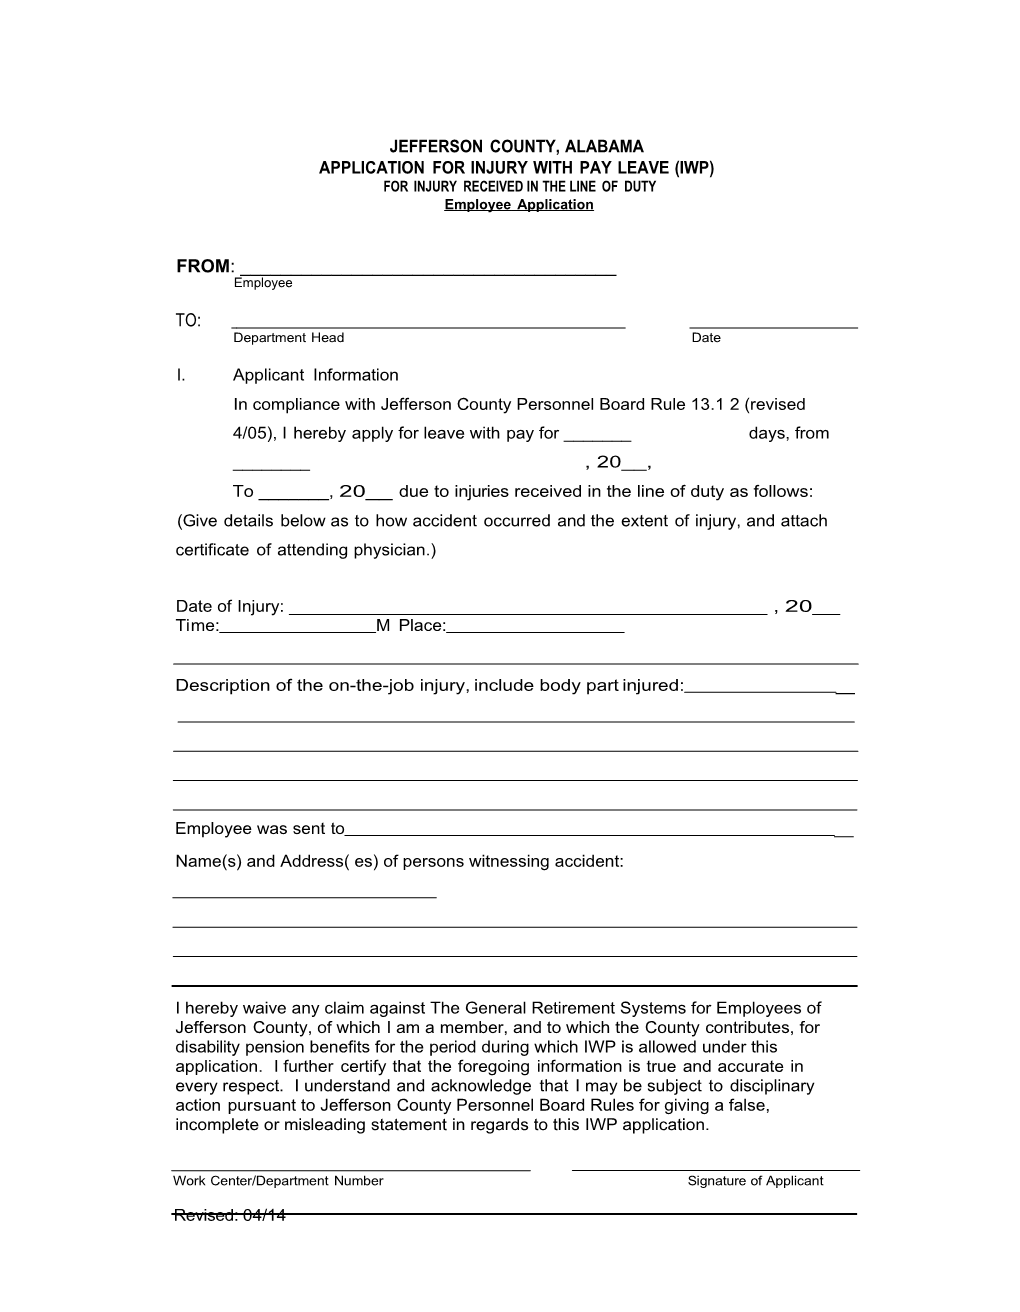 Jefferson County, Alabama Application for Injury with Pay Leave (Iwp)